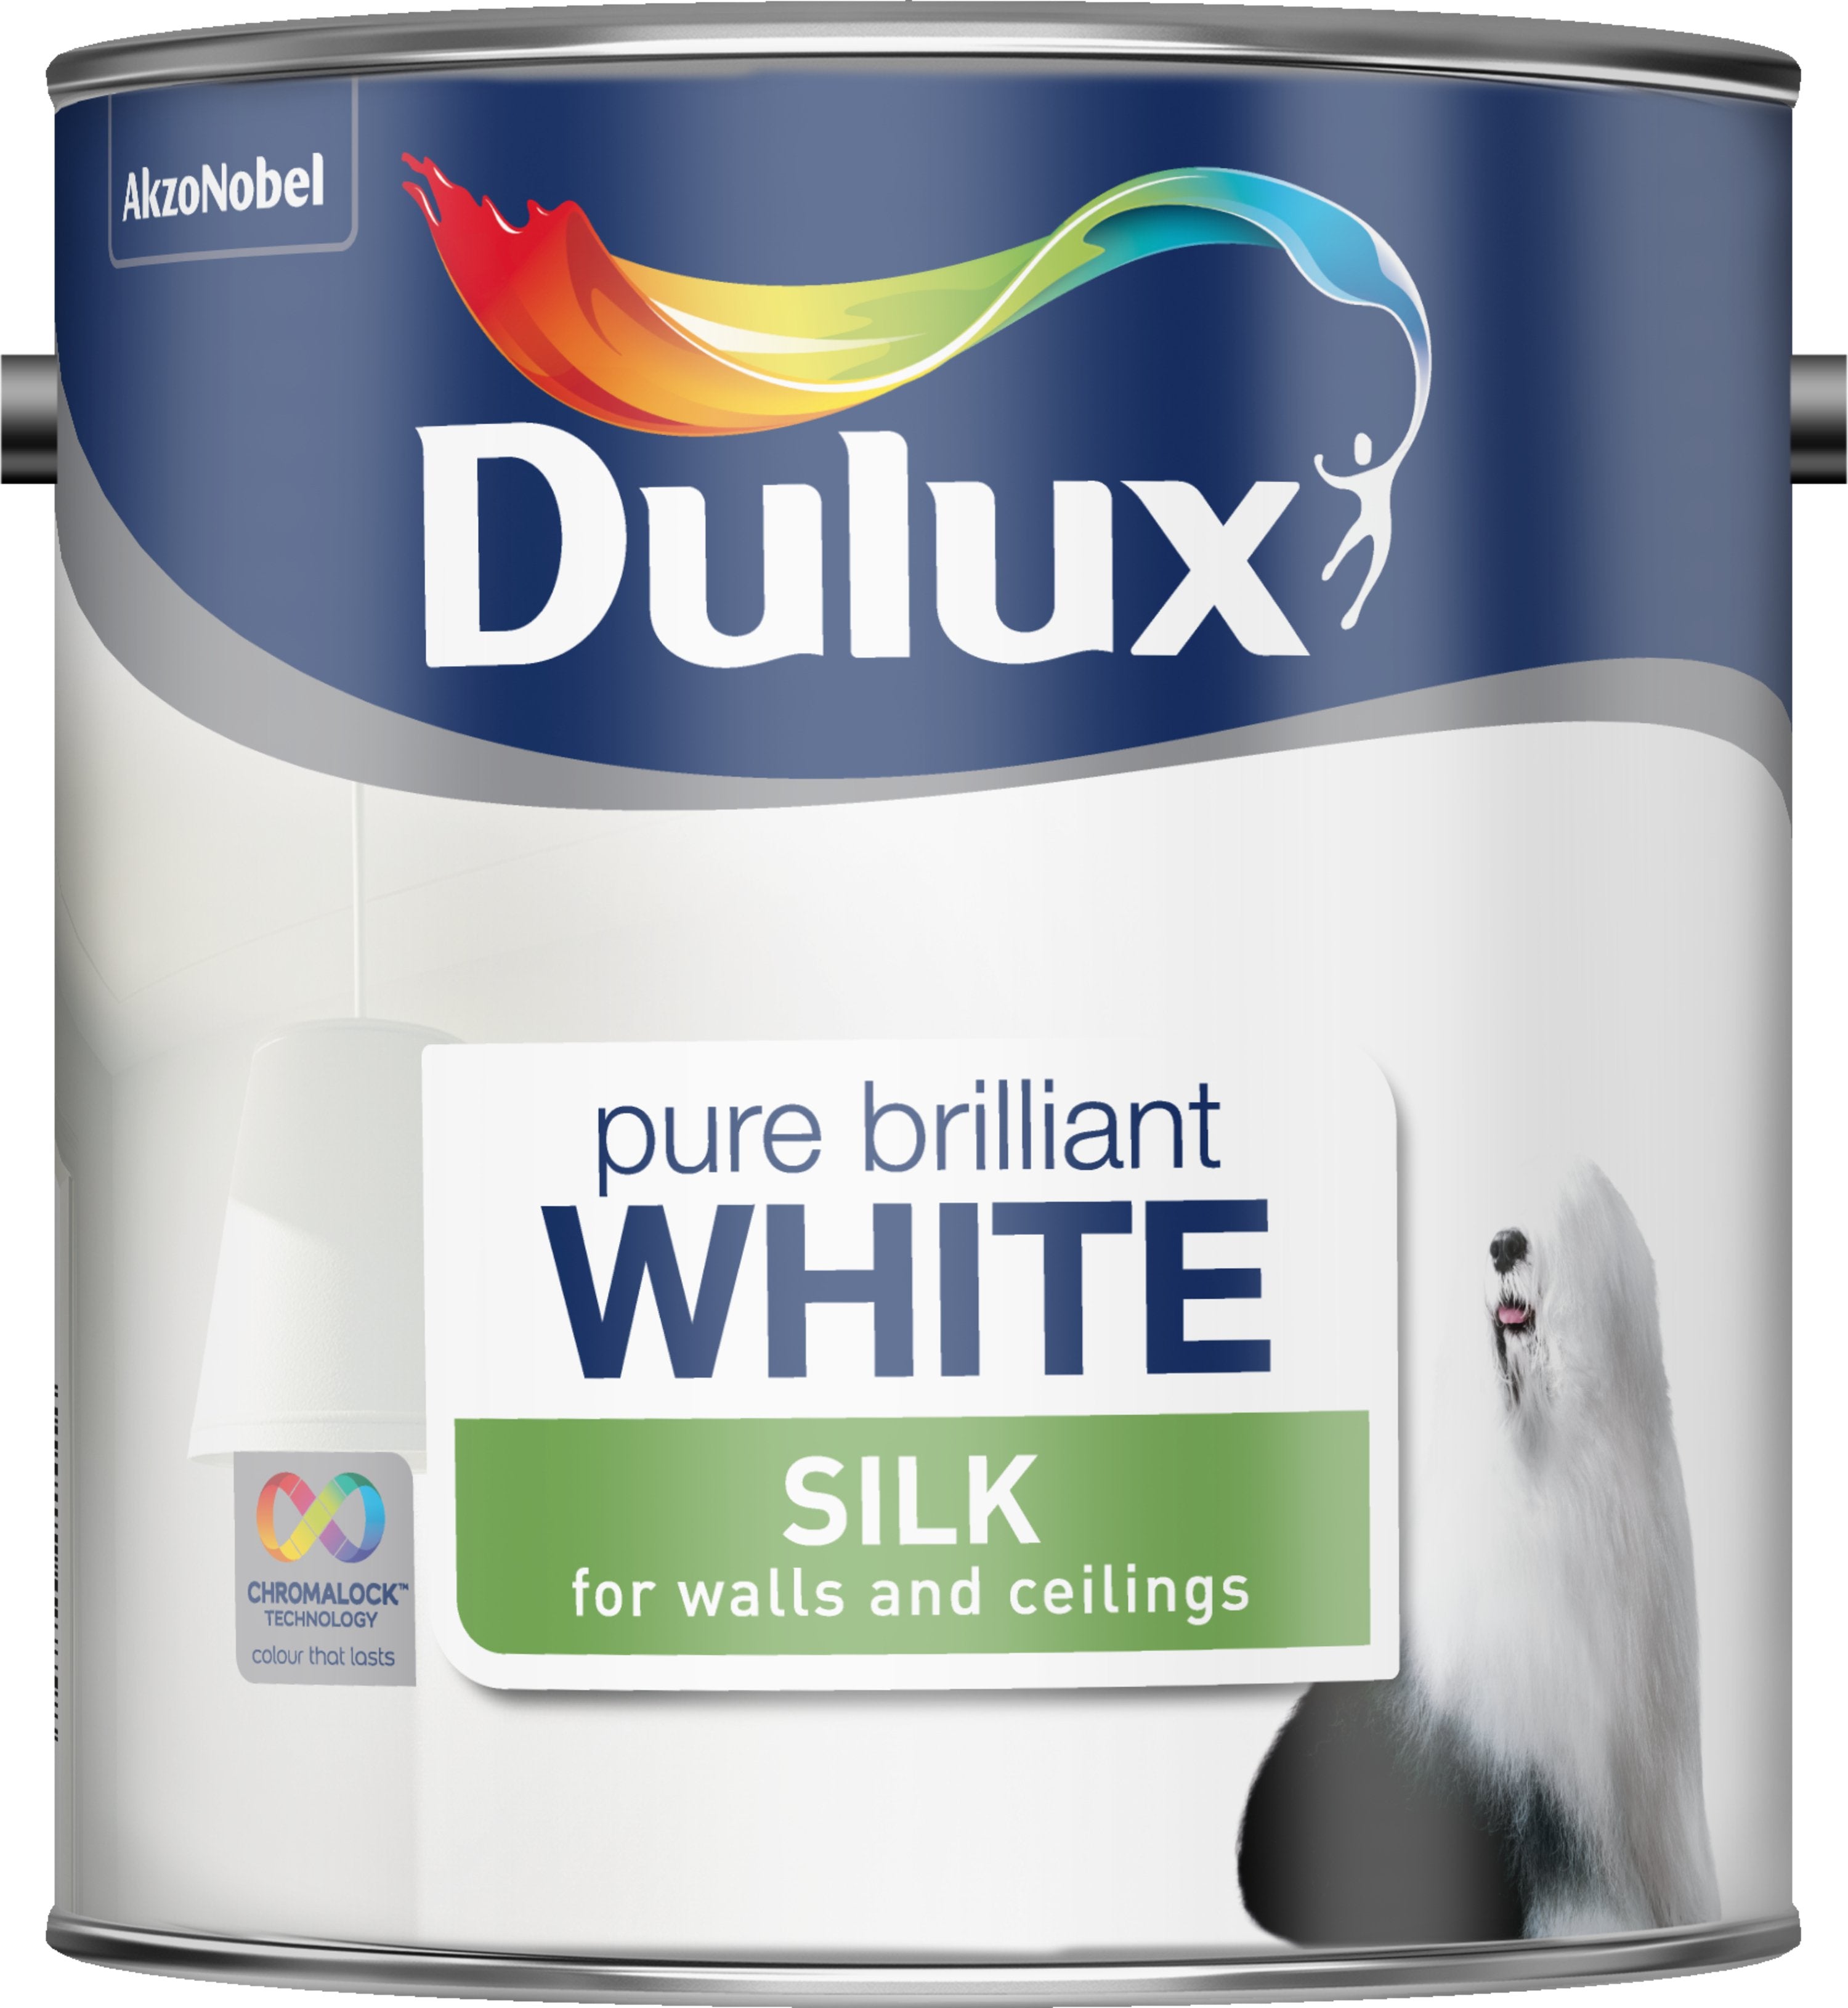 Dulux-Silk-Emulsion-Paint-For-Walls-And-Ceilings-Pure-Brilliant-White-2.5L